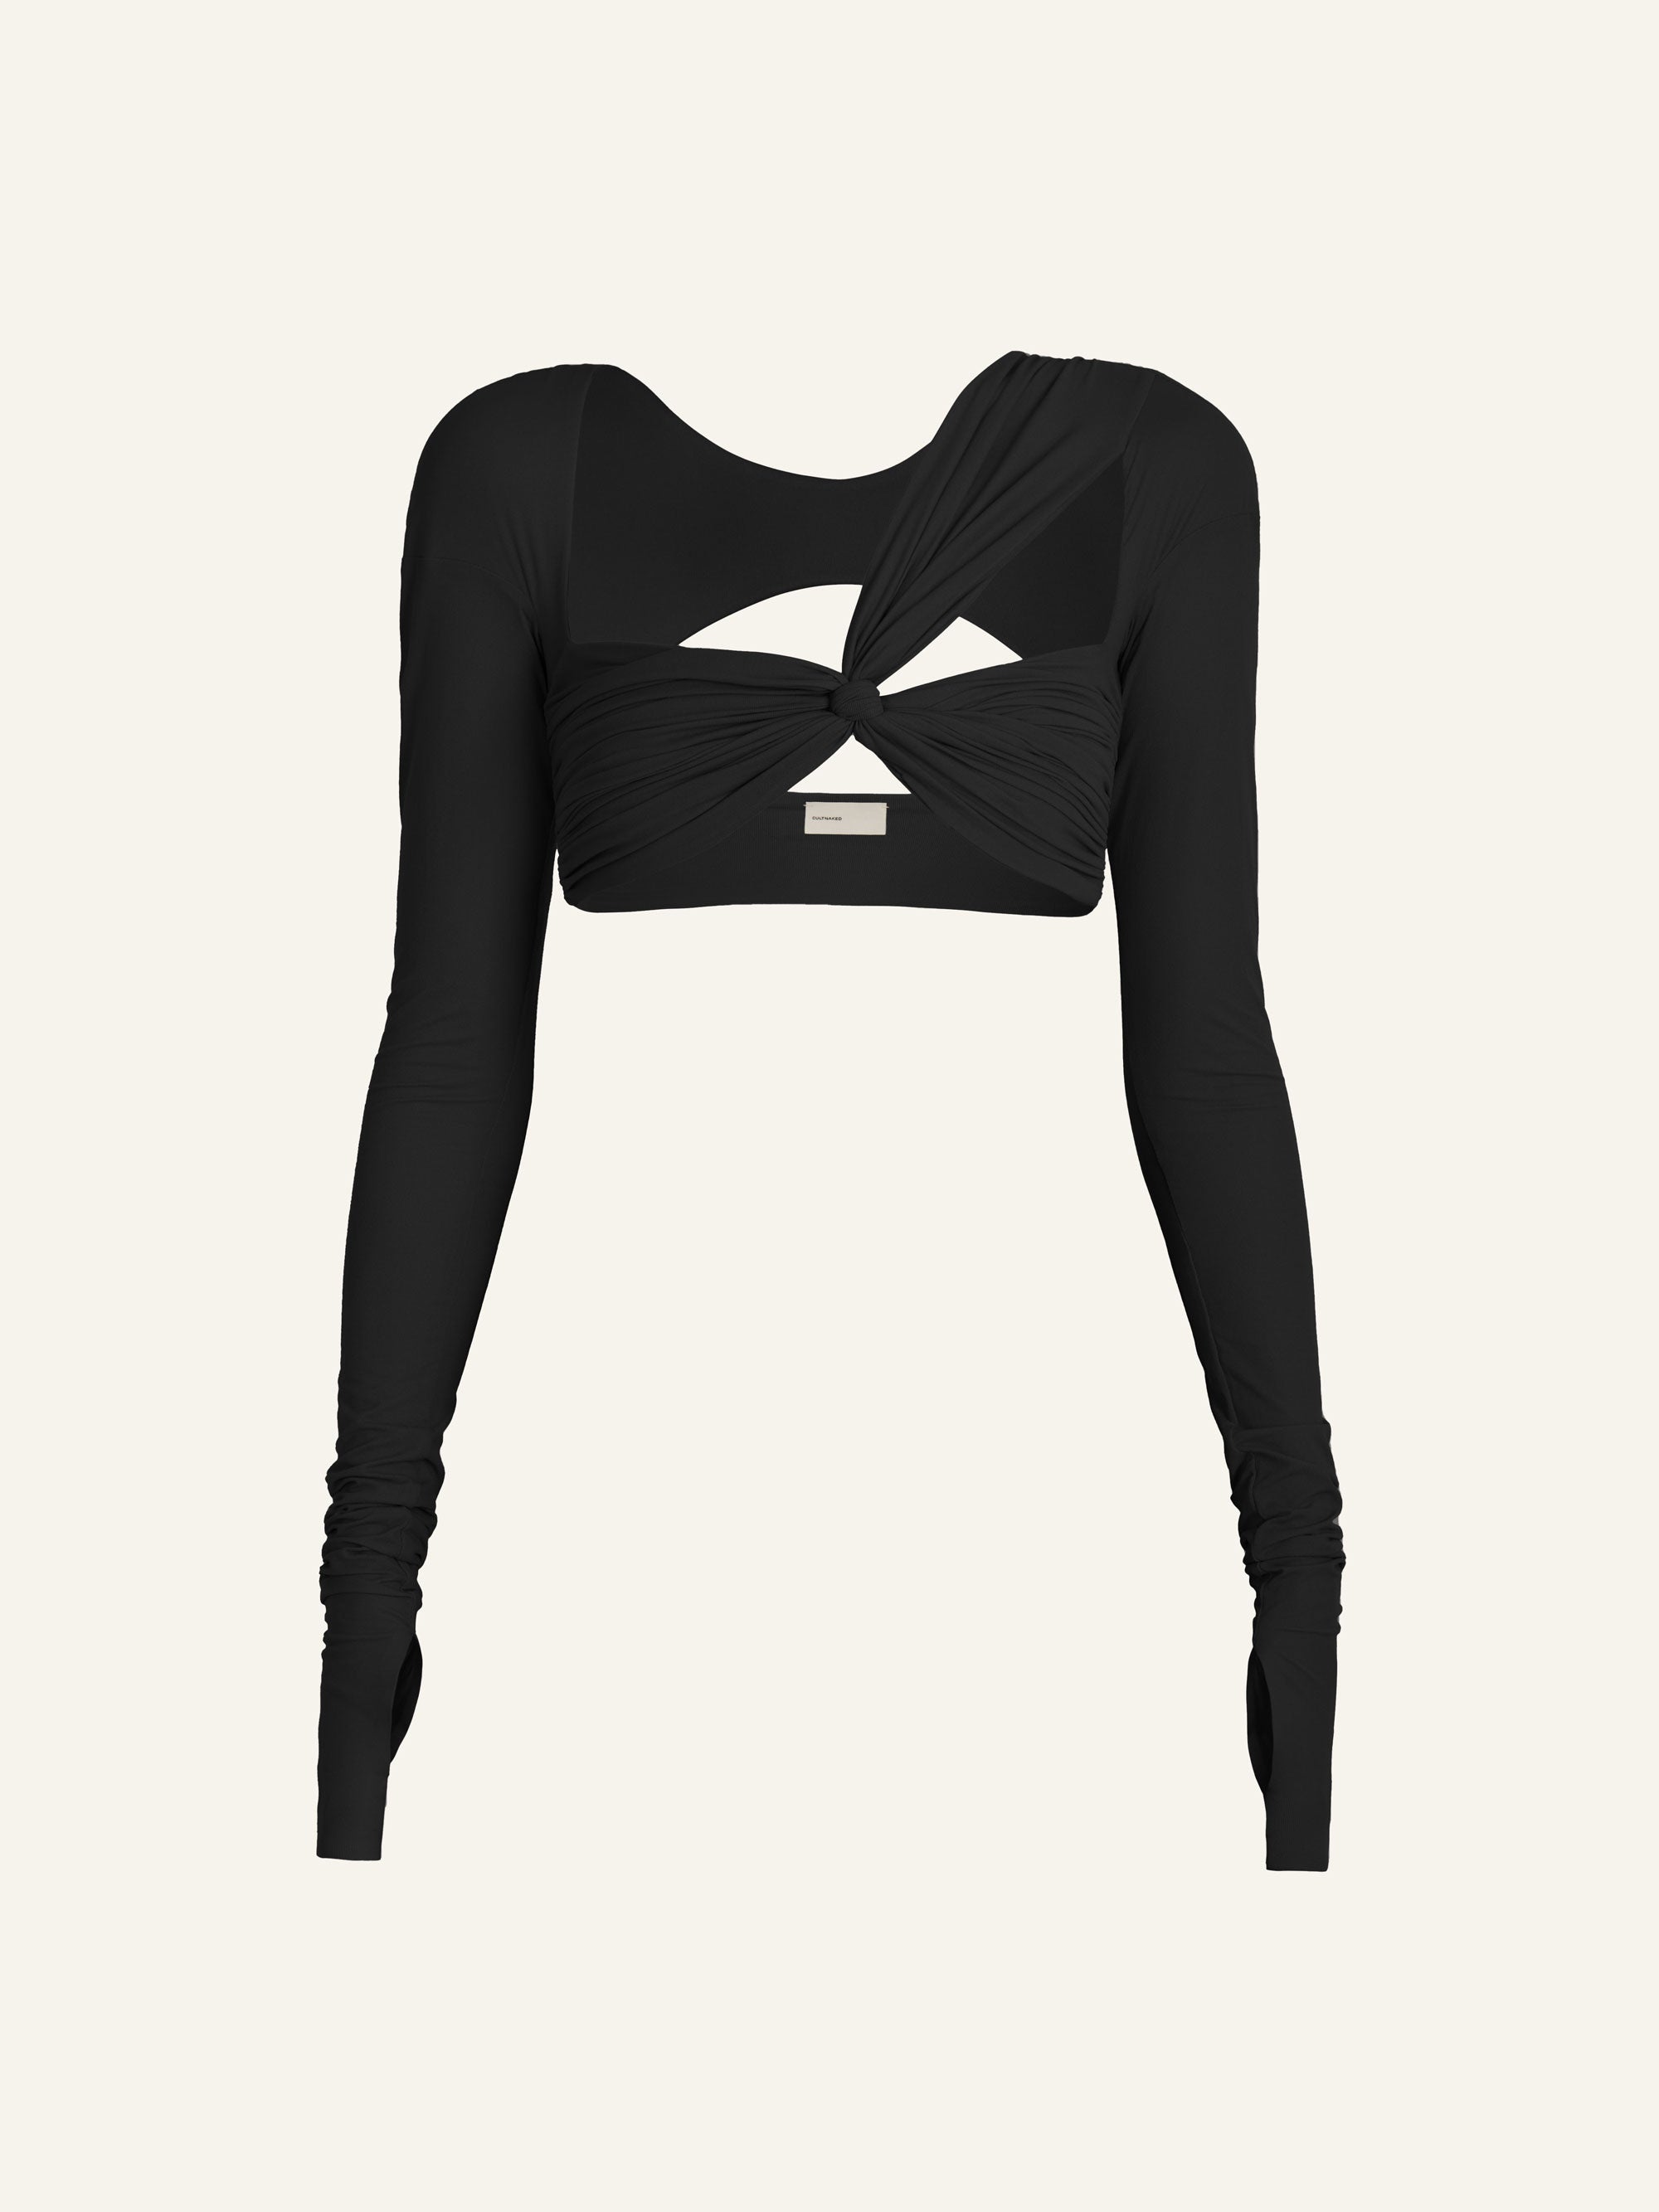 Product photo of a black long sleeved crop top